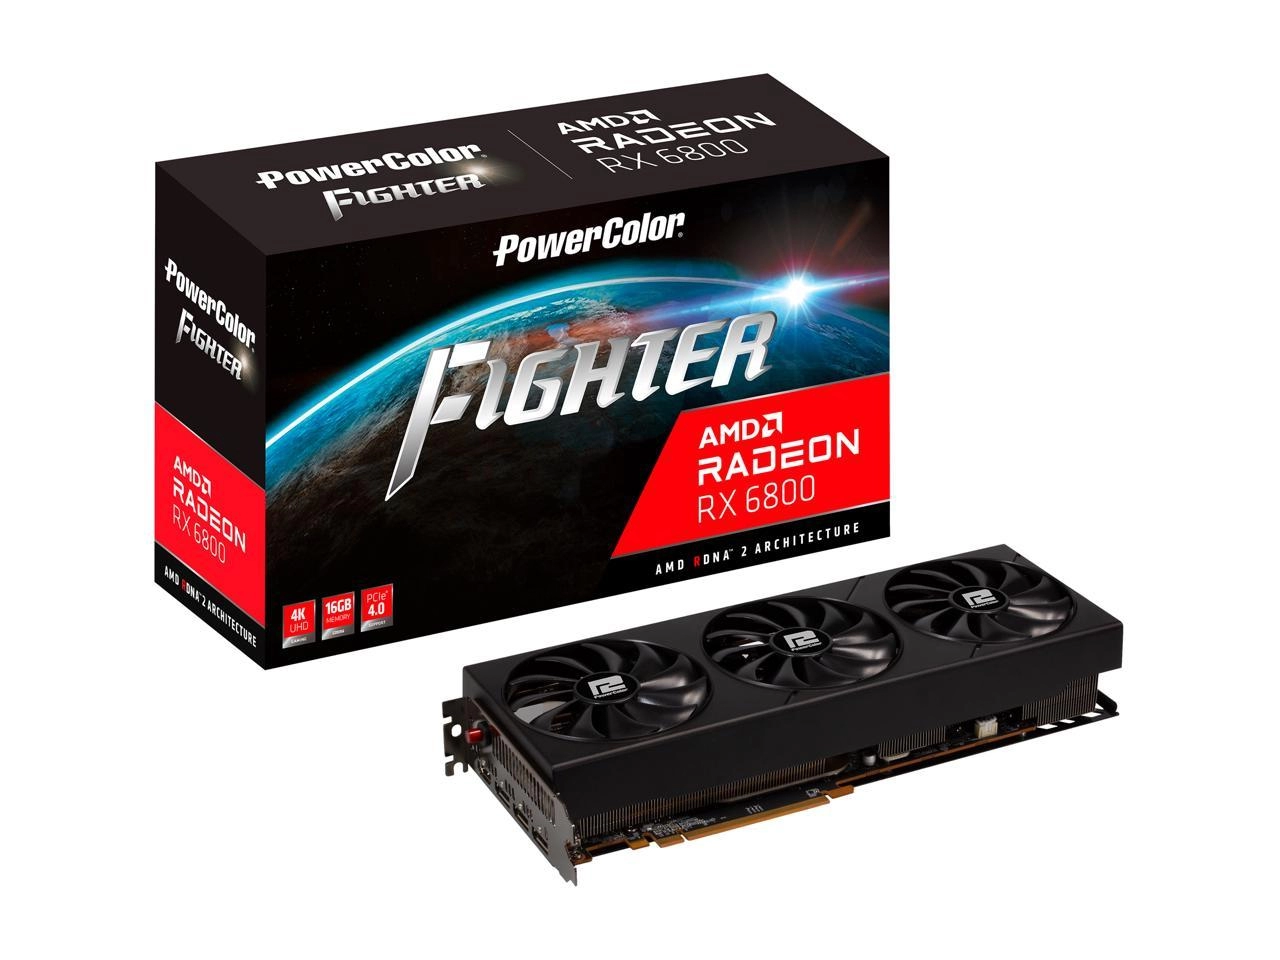 PowerColor Fighter AMD Radeon RX 6800 16GB GDDR6 Package